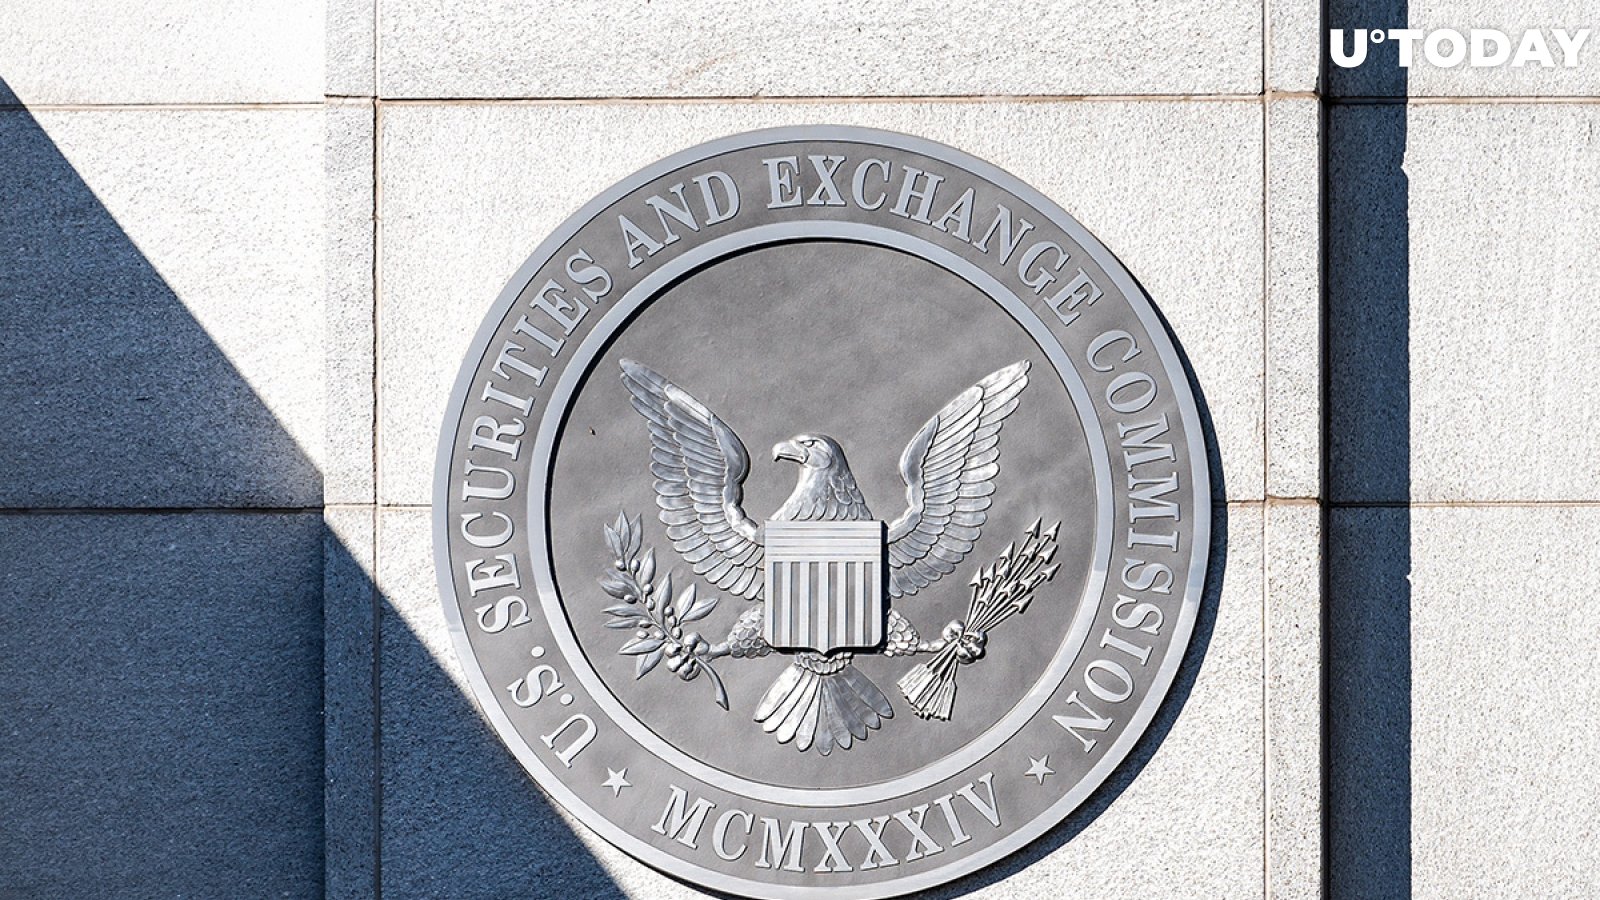 SEC Claims XRP Holders Are “Too Partial,” Citing Physical Violence References 